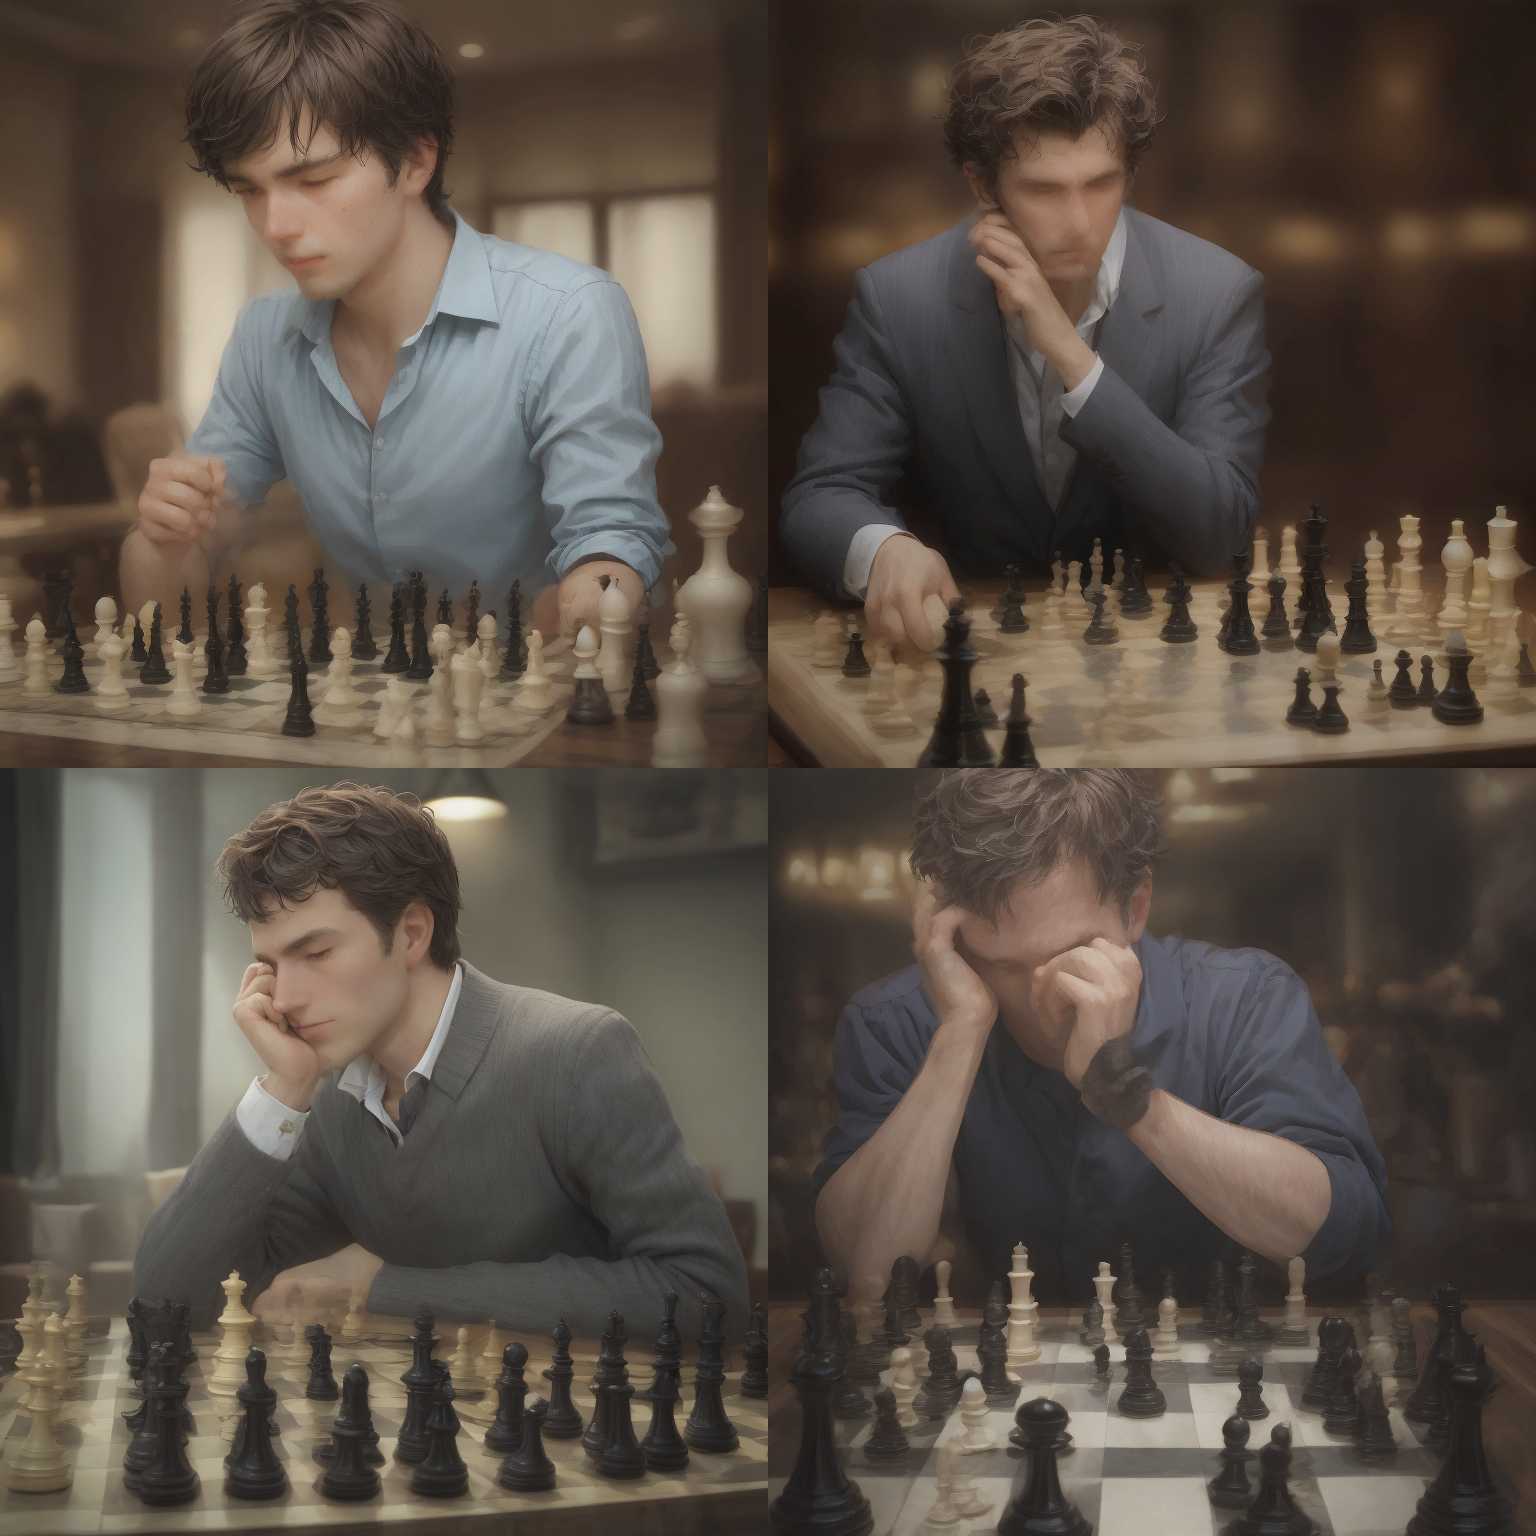 A chess player during the opponent's turn